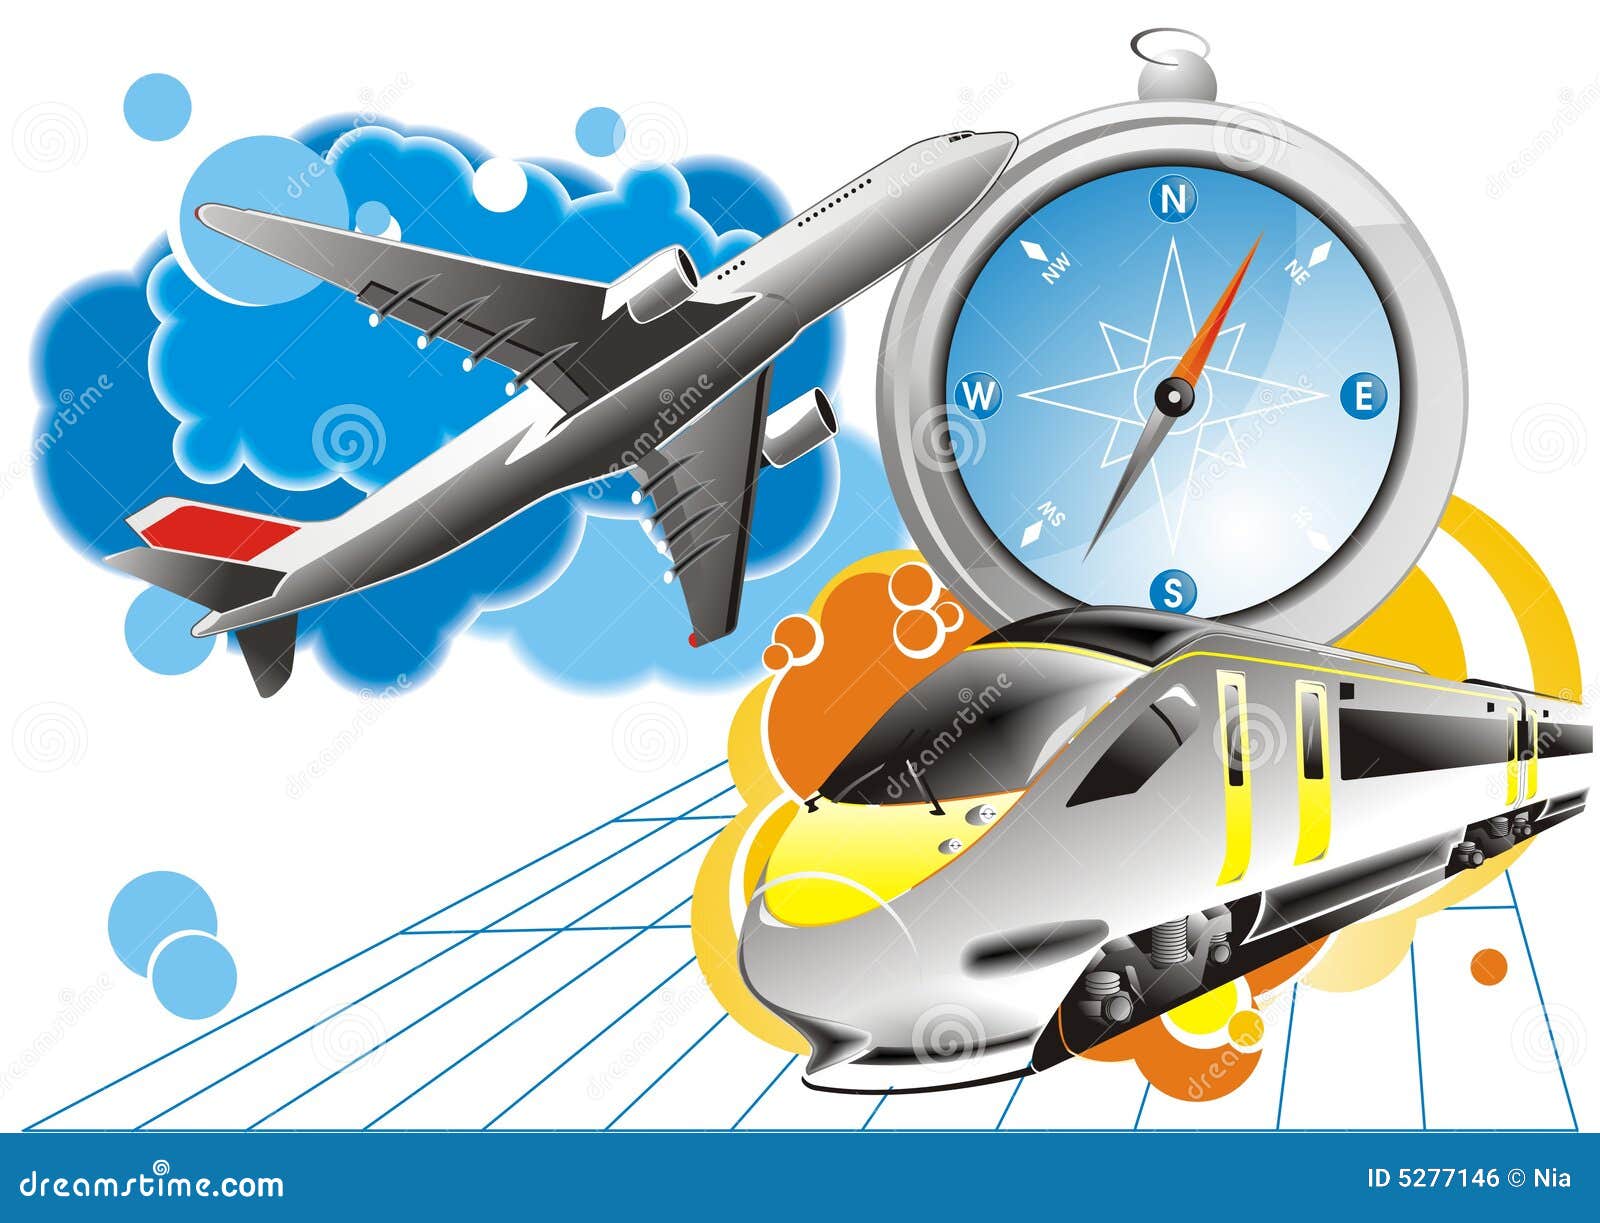 travel clipart free download - photo #13